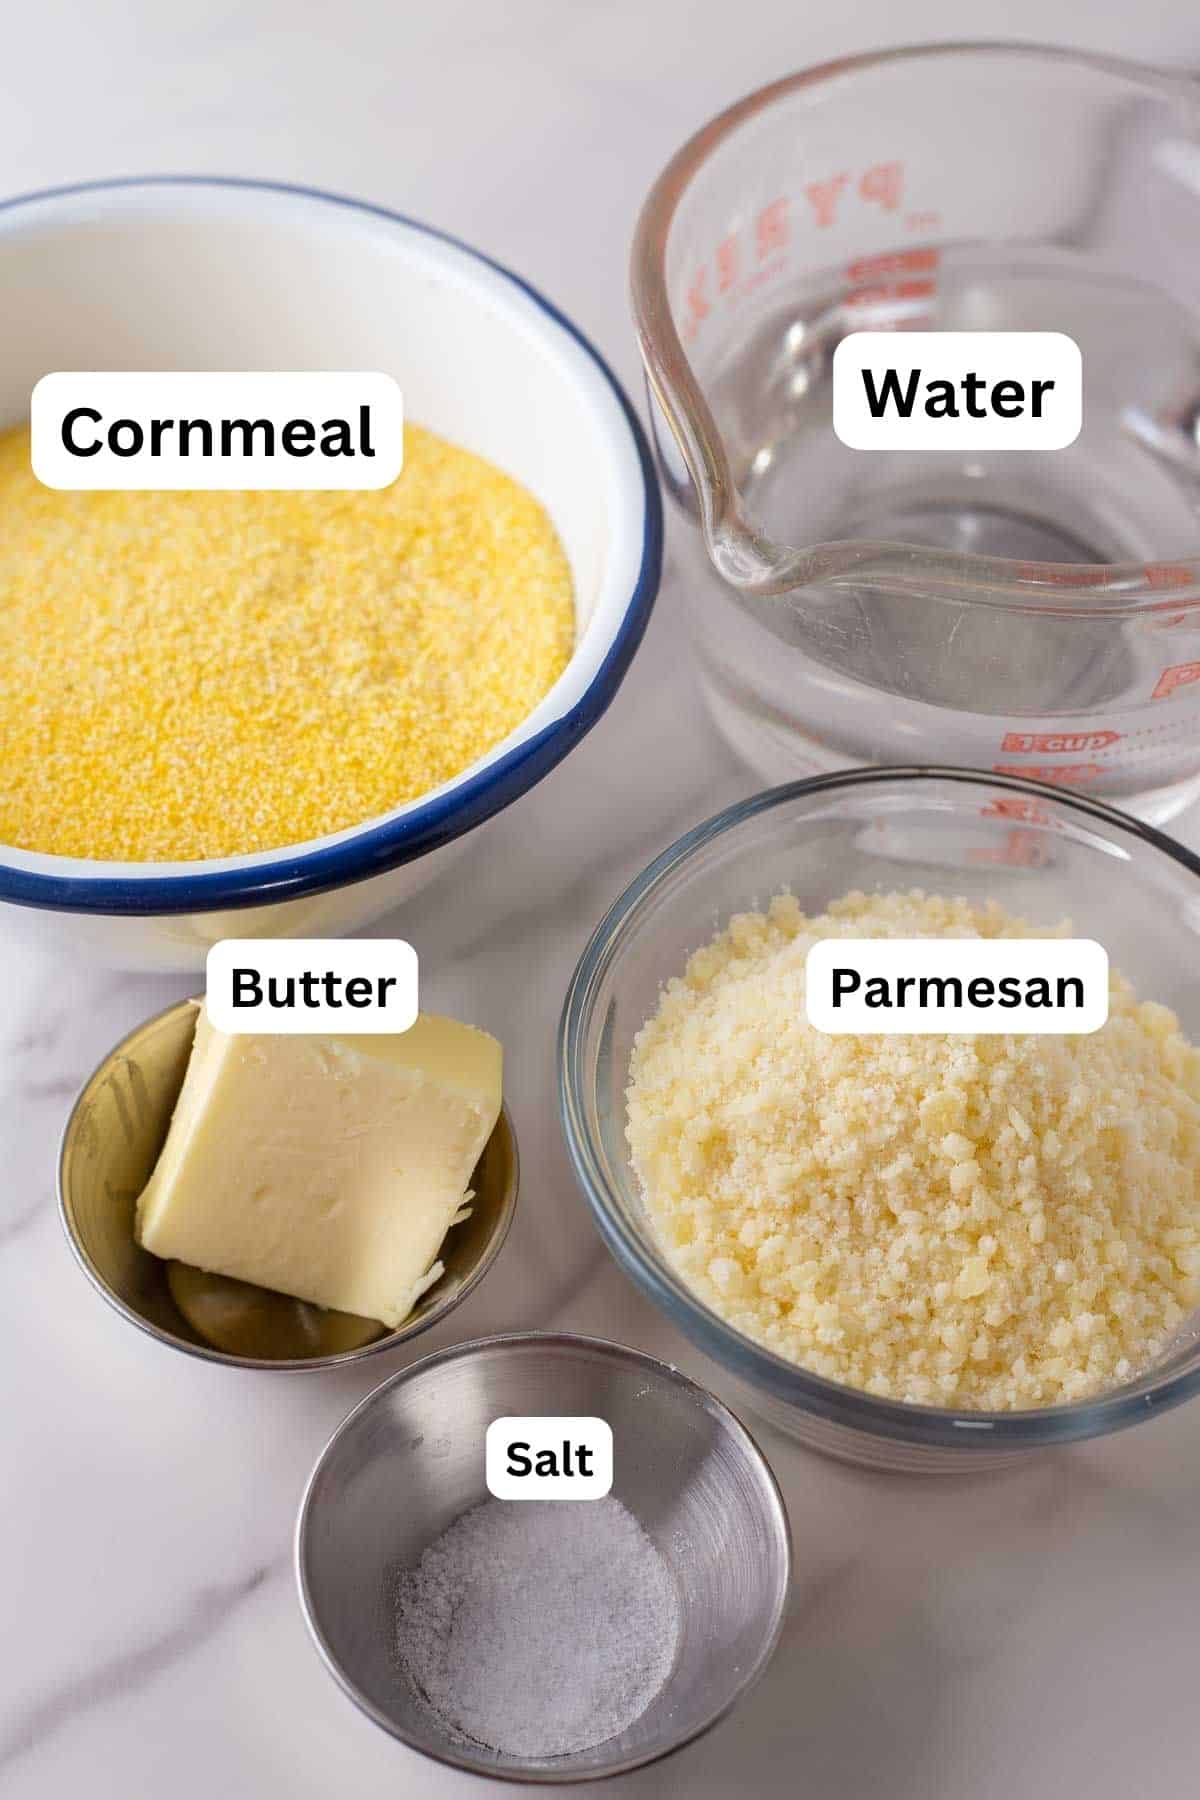 Tall image showing labeled ingredients for polenta.